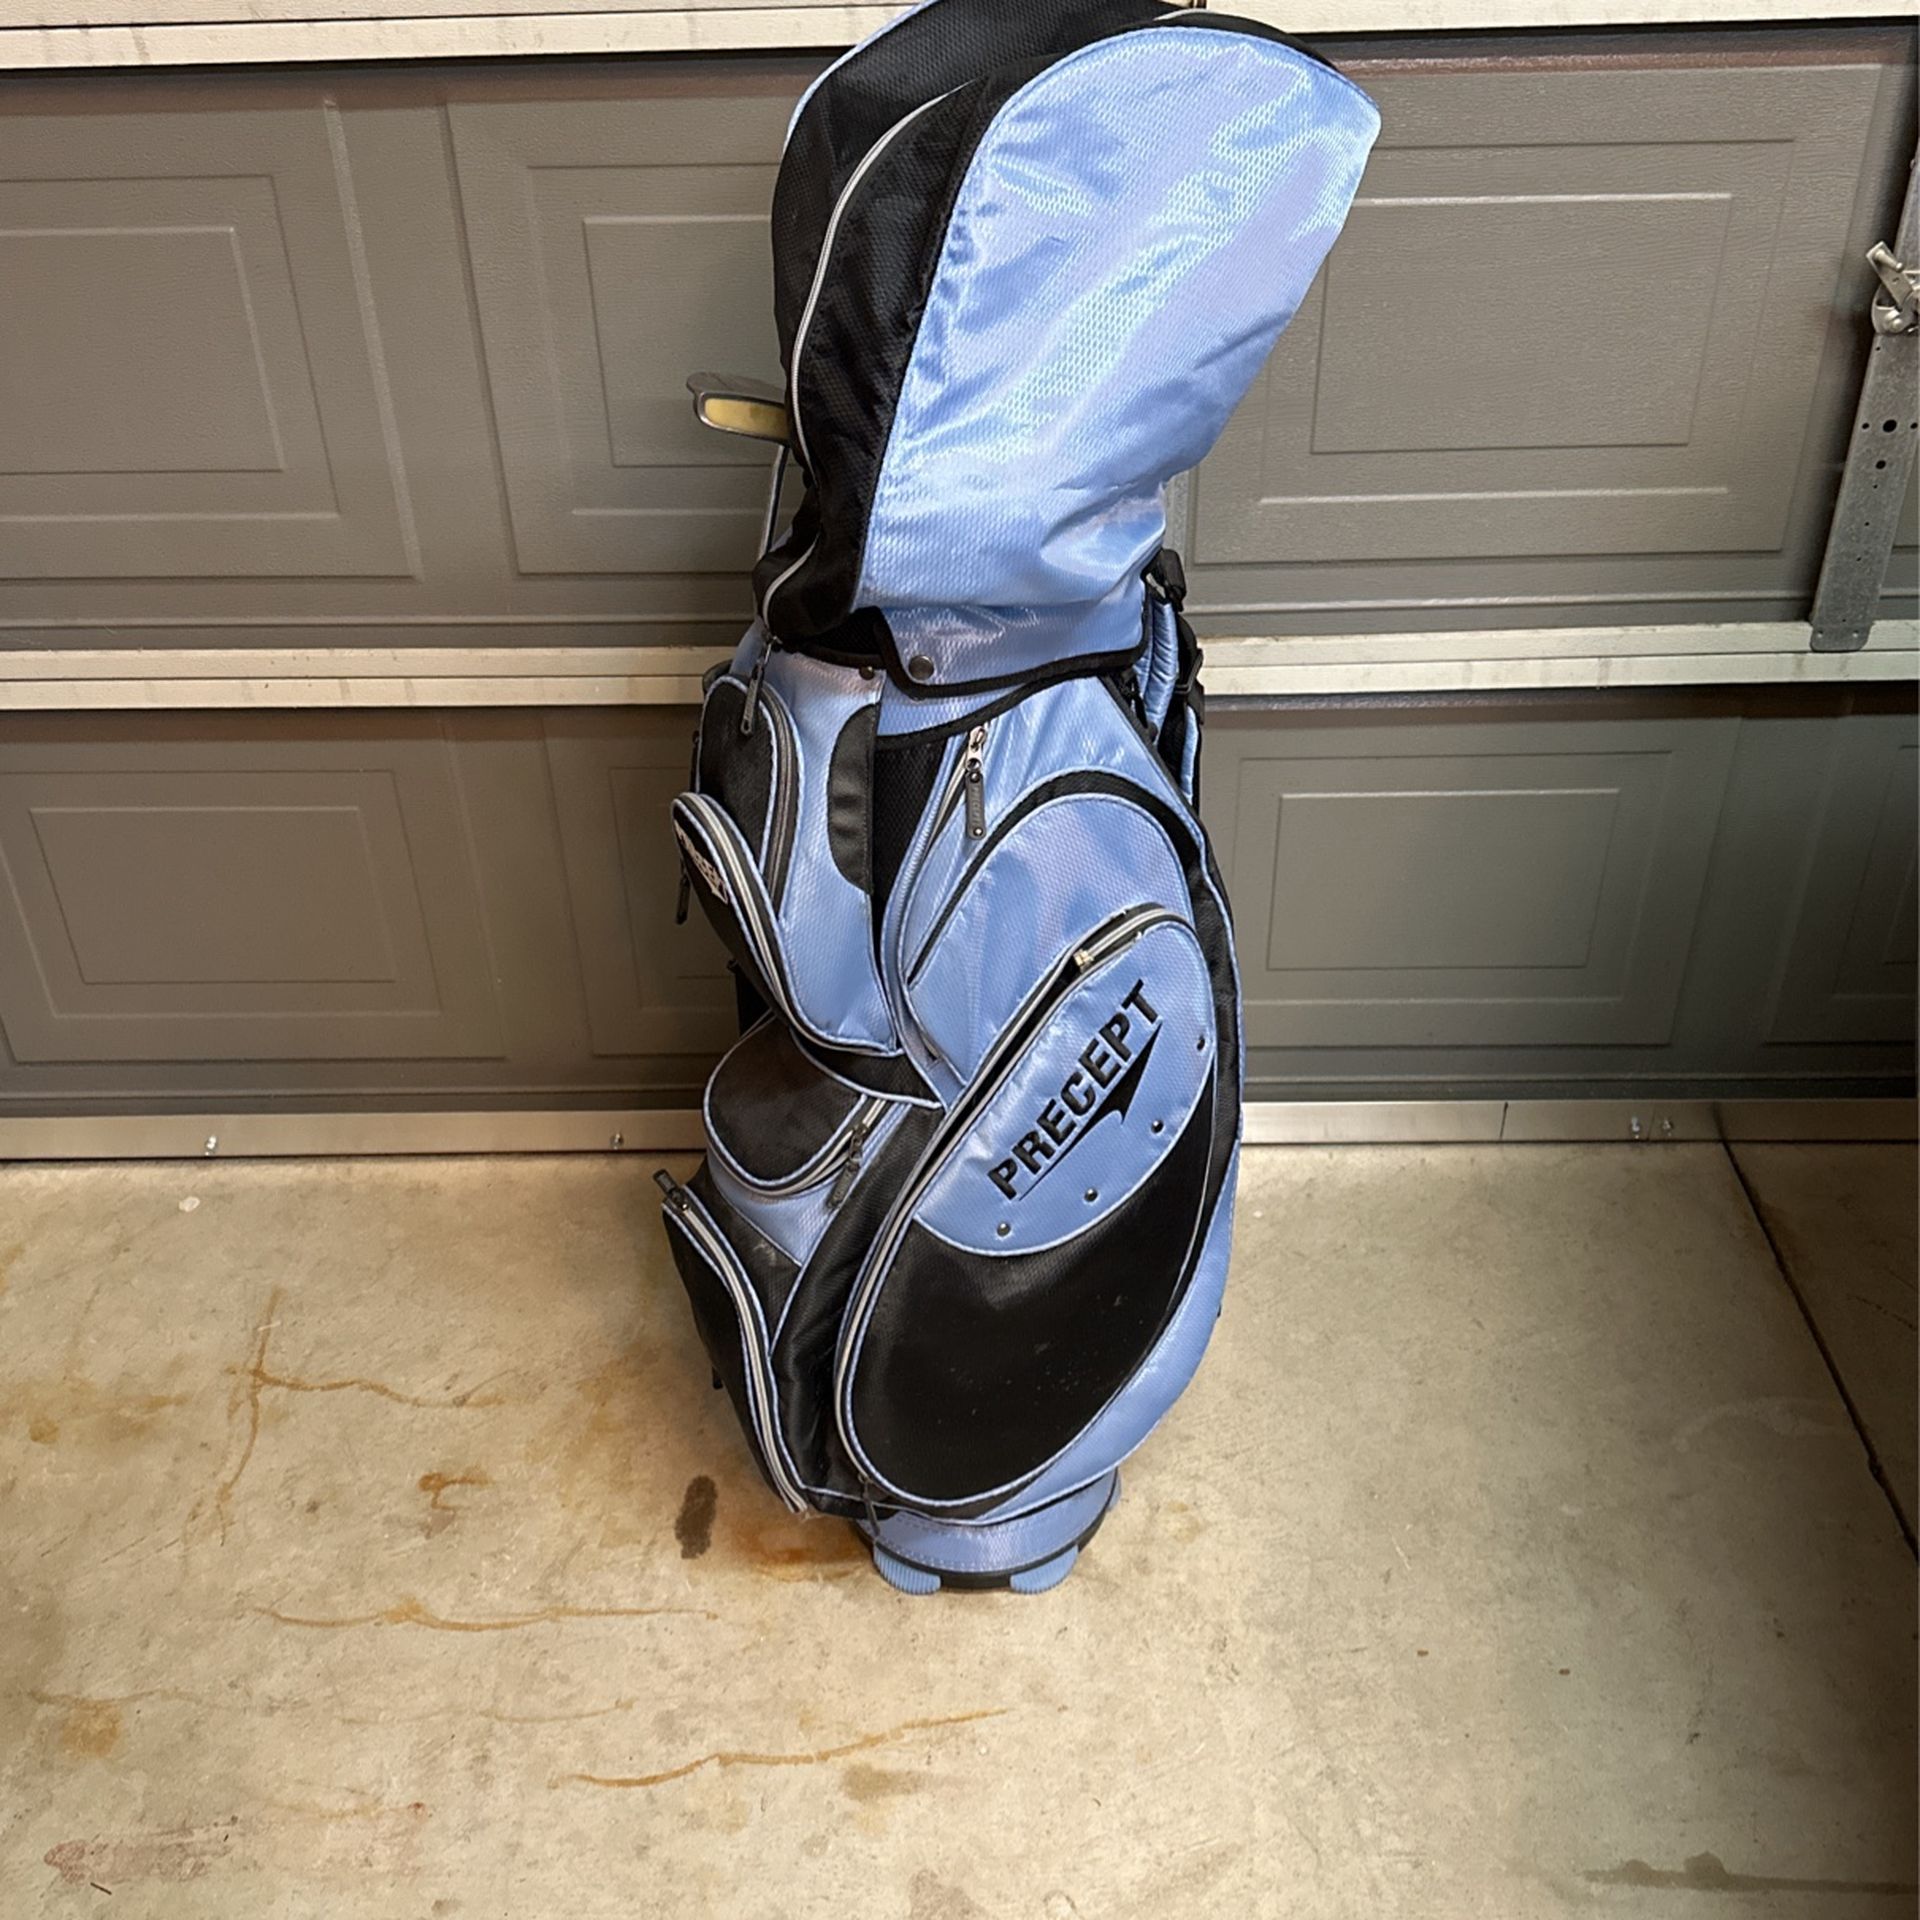 Left Handed Woman’s Golf Clubs With Bag